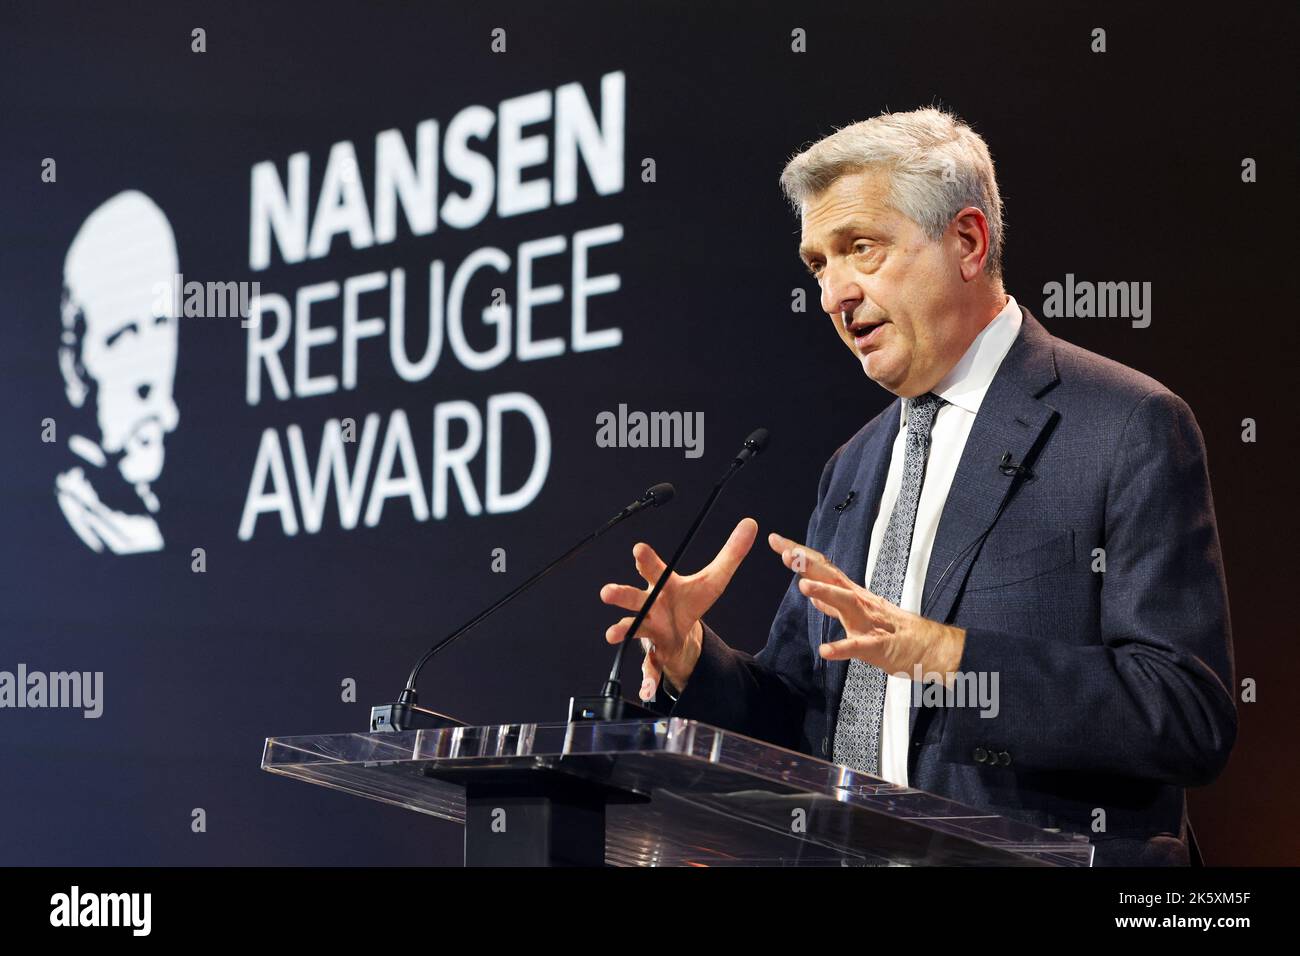 United Nations High Commissioner for Refugees Filippo Grandi speaks before Angela Merkel receives the UNHCR Nansen Refugee Award for protecting refugees at height of Syria crisis, during a ceremony in Geneva, Switzerland, October 10, 2022. REUTERS/Stefan Wermuth/Pool Stock Photo